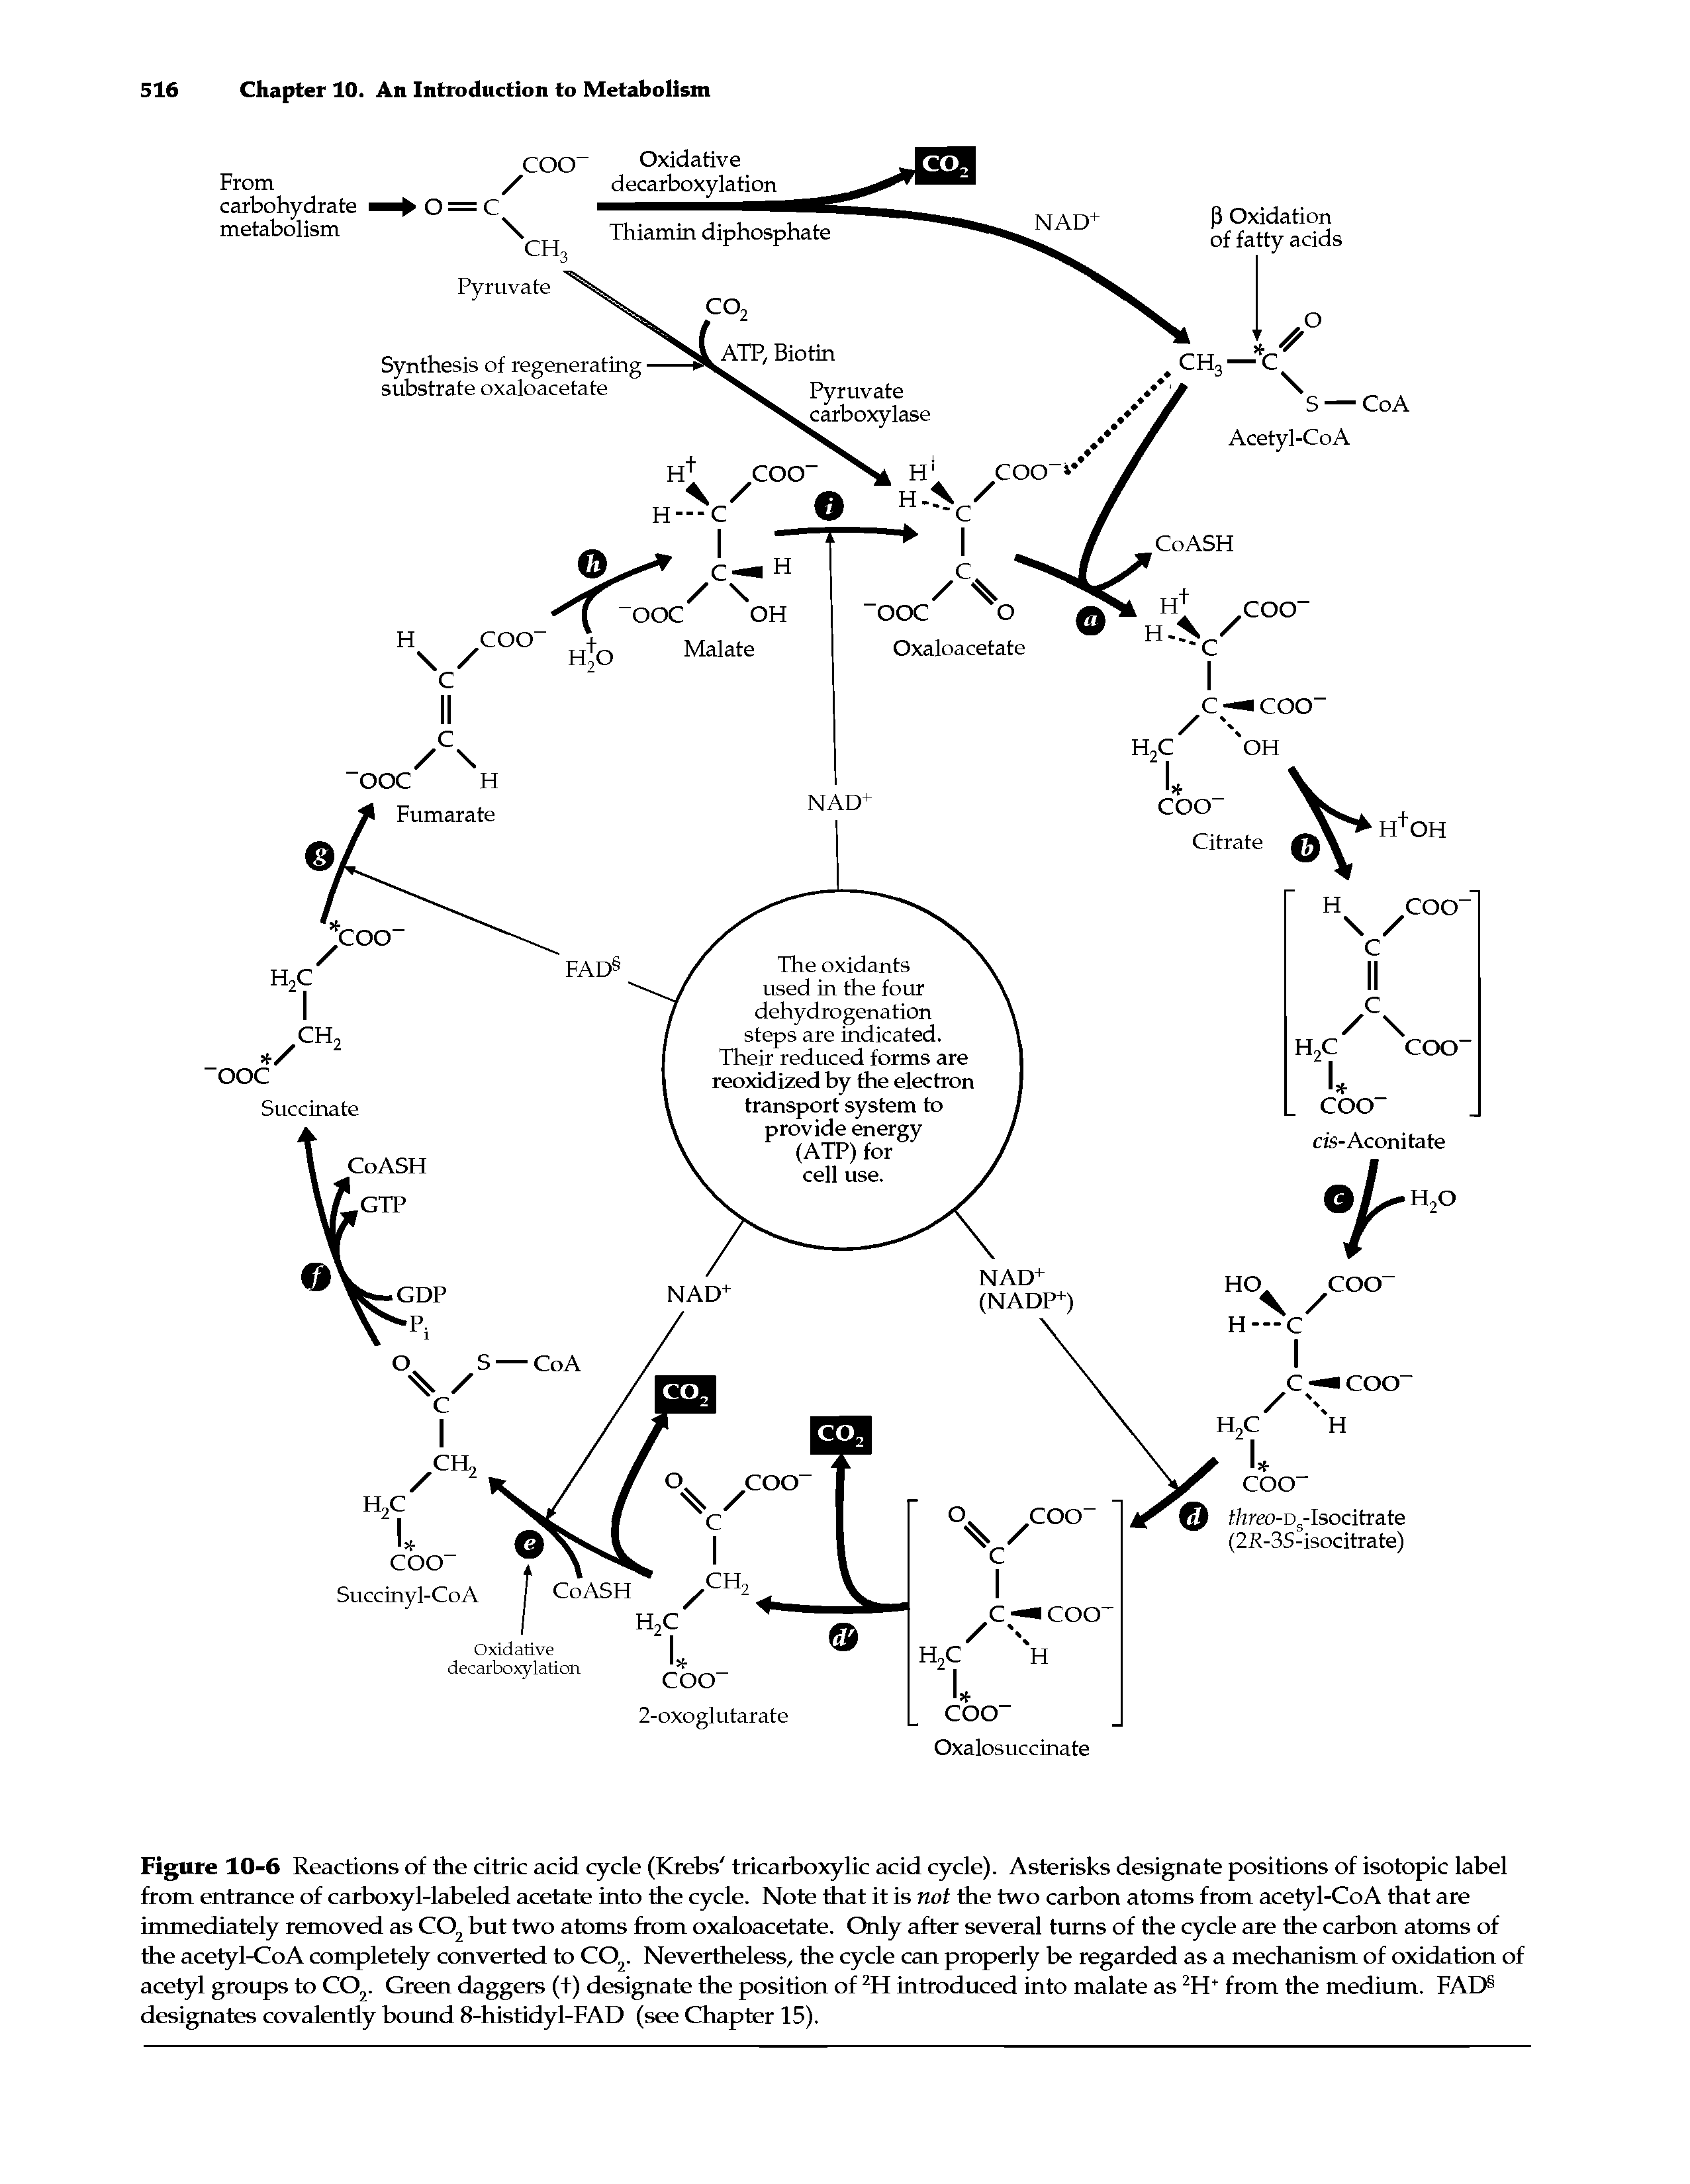 Figure 10-6 Reactions of the citric acid cycle (Krebs tricarboxylic acid cycle). Asterisks designate positions of isotopic label from entrance of carboxyl-labeled acetate into the cycle. Note that it is not the two carbon atoms from acetyl-CoA that are immediately removed as C02 but two atoms from oxaloacetate. Only after several turns of the cycle are the carbon atoms of the acetyl-CoA completely converted to C02. Nevertheless, the cycle can properly be regarded as a mechanism of oxidation of acetyl groups to C02. Green daggers (+) designate the position of 2H introduced into malate as 2H from the medium. FADS designates covalently bound 8-histidyl-FAD (see Chapter 15).